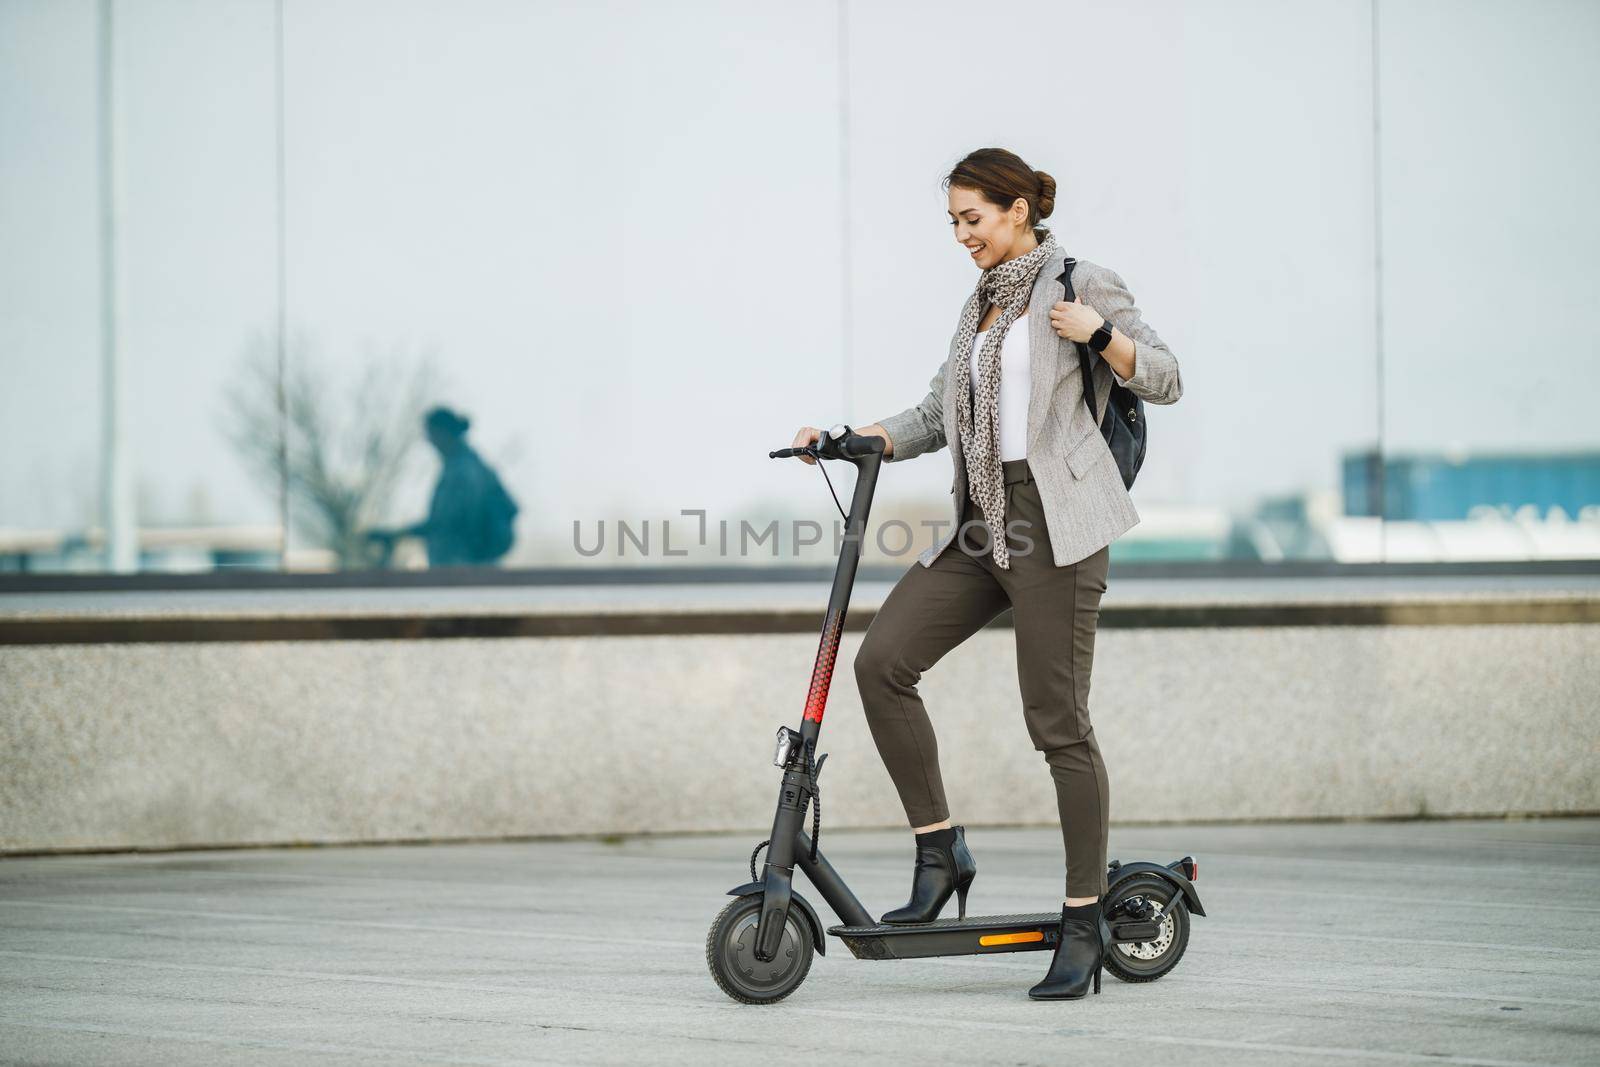 A young businesswoman riding an electric scooter on her way to work.